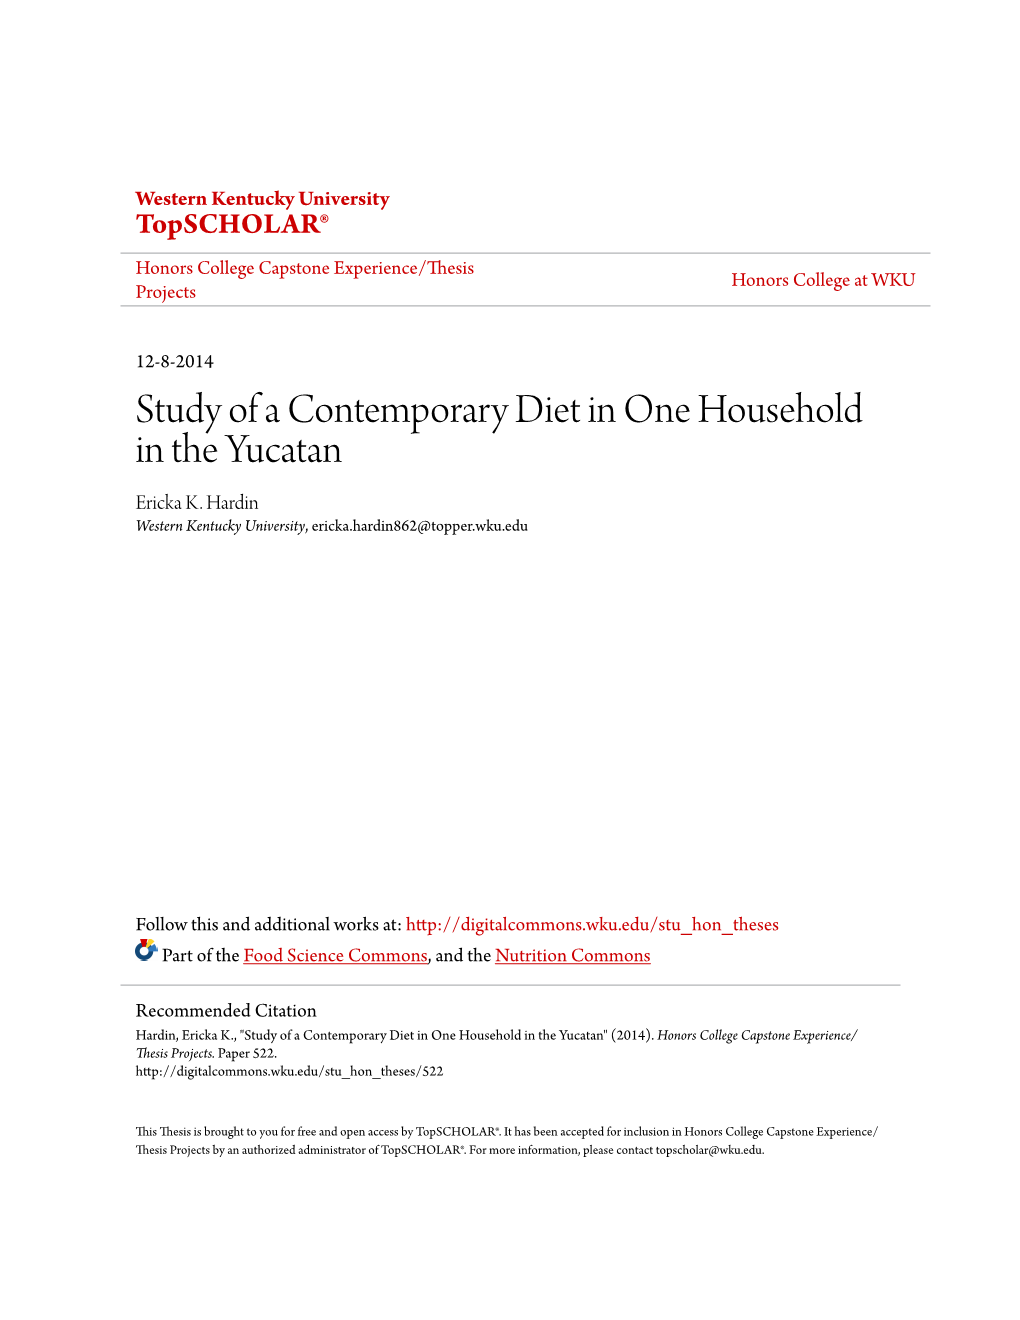 Study of a Contemporary Diet in One Household in the Yucatan Ericka K